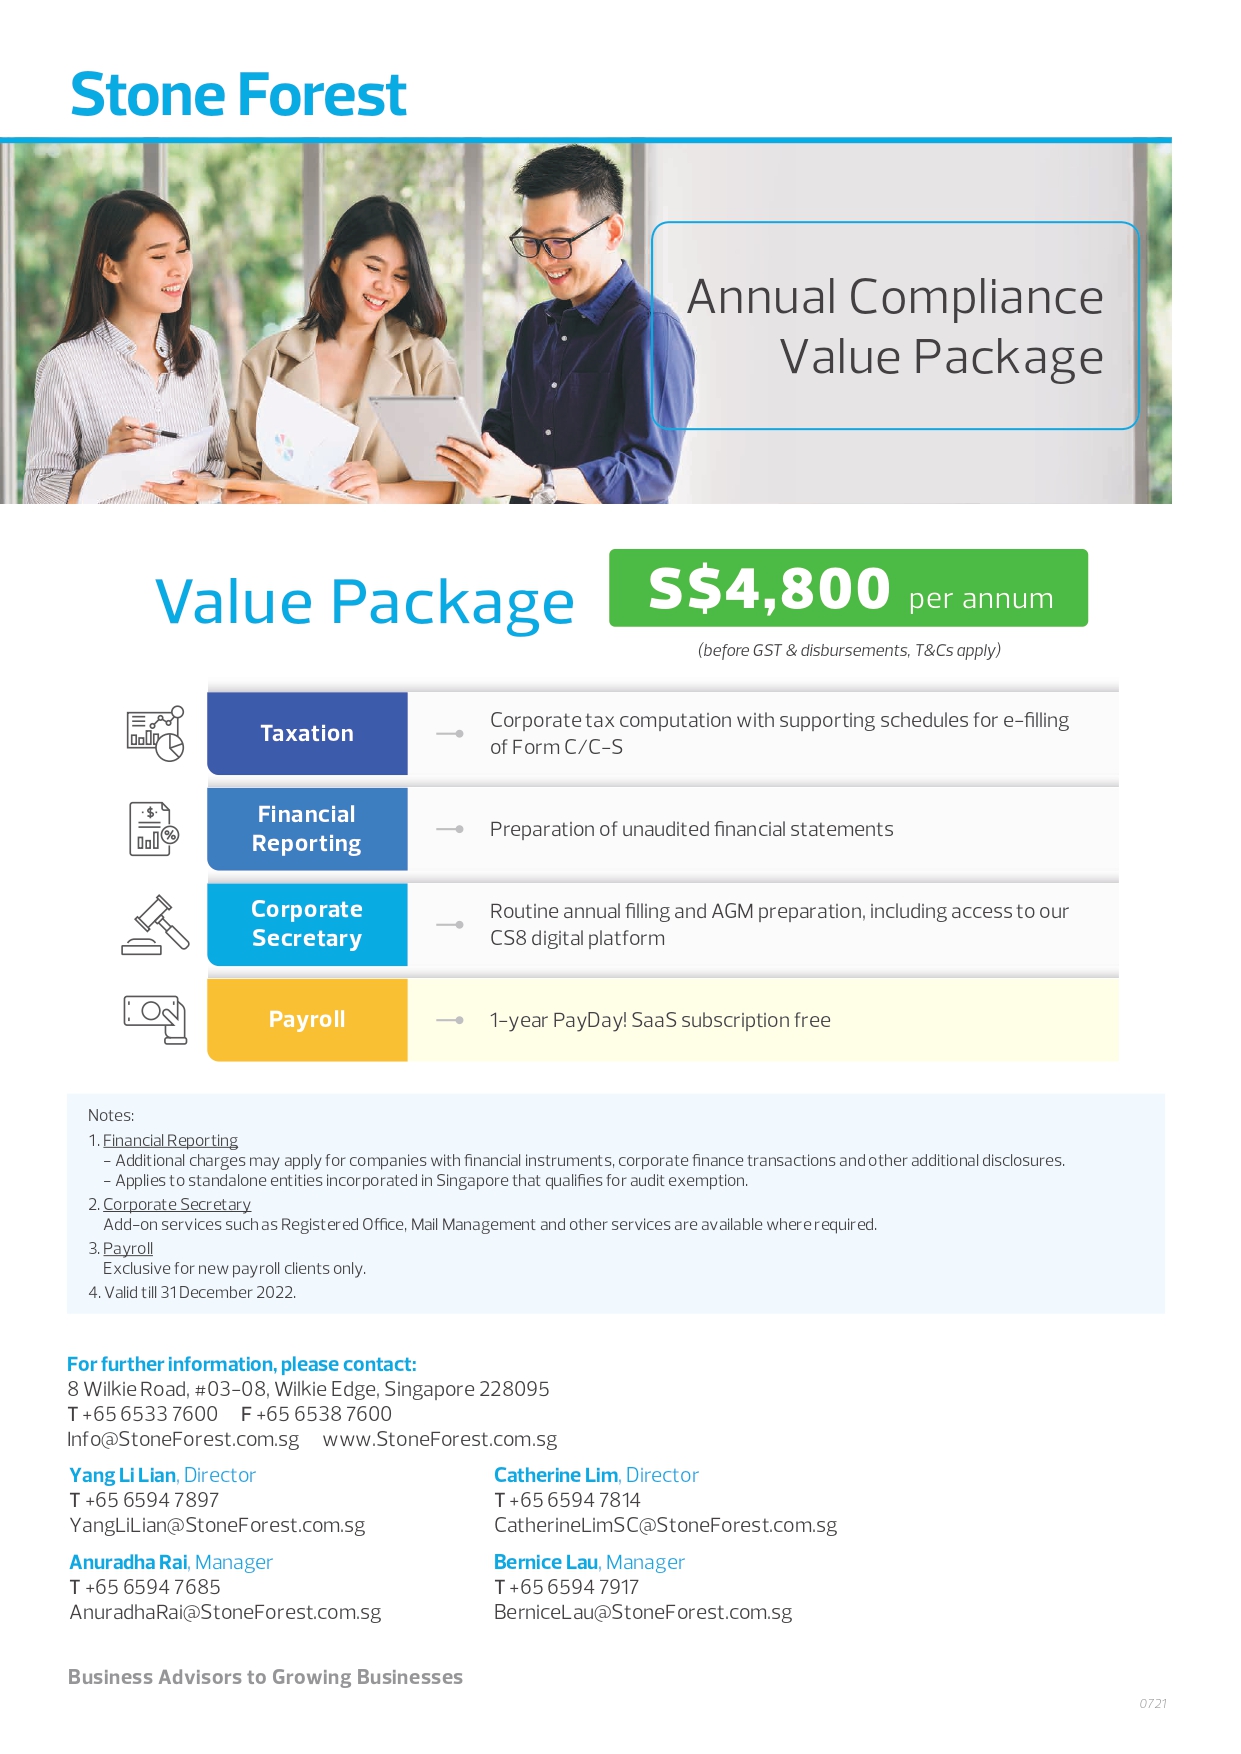 Annual Compliance Package comes with taxation, financial reporting, corporate secretary and payroll services.